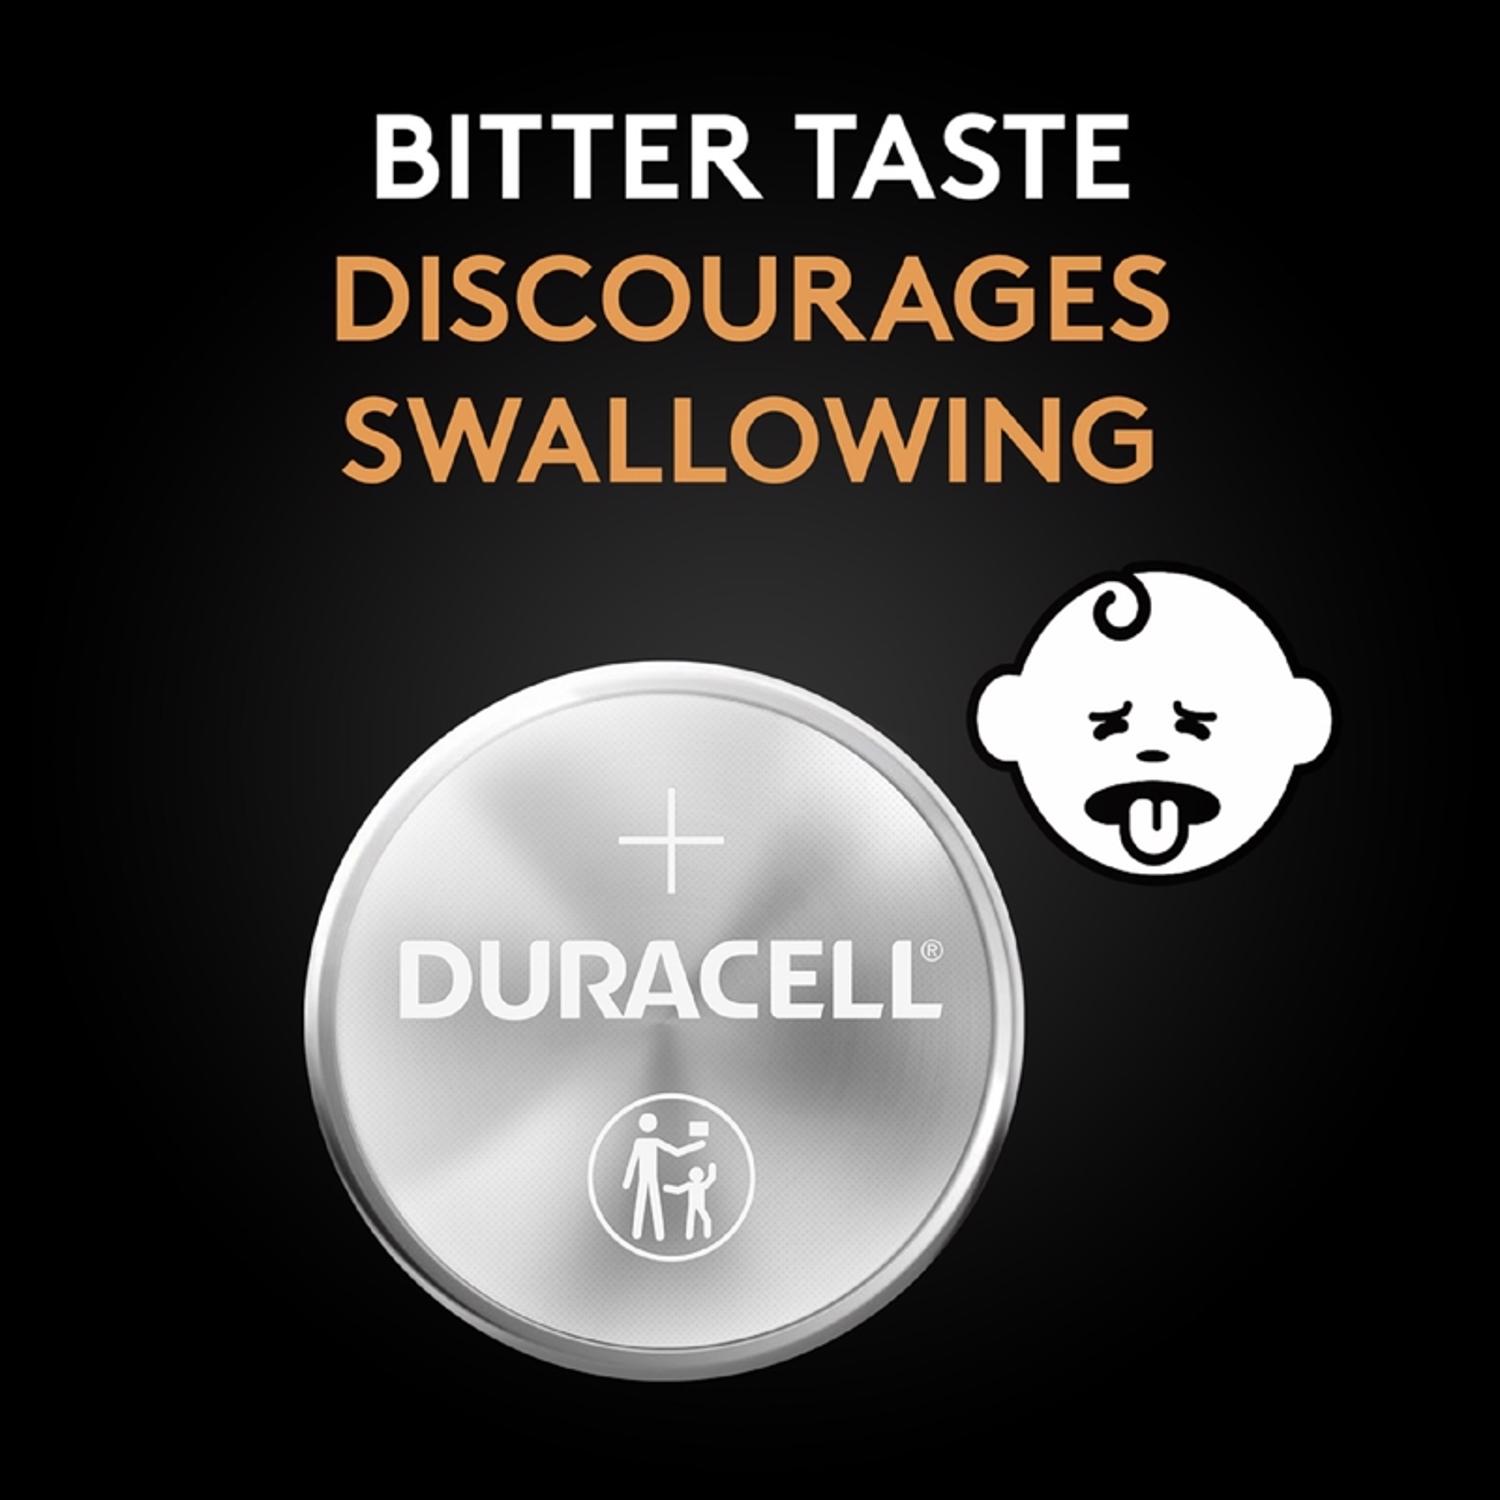 Duracell Lithium Coin 2016 3 V 75 Ah Security and Electronic Battery 1 pk